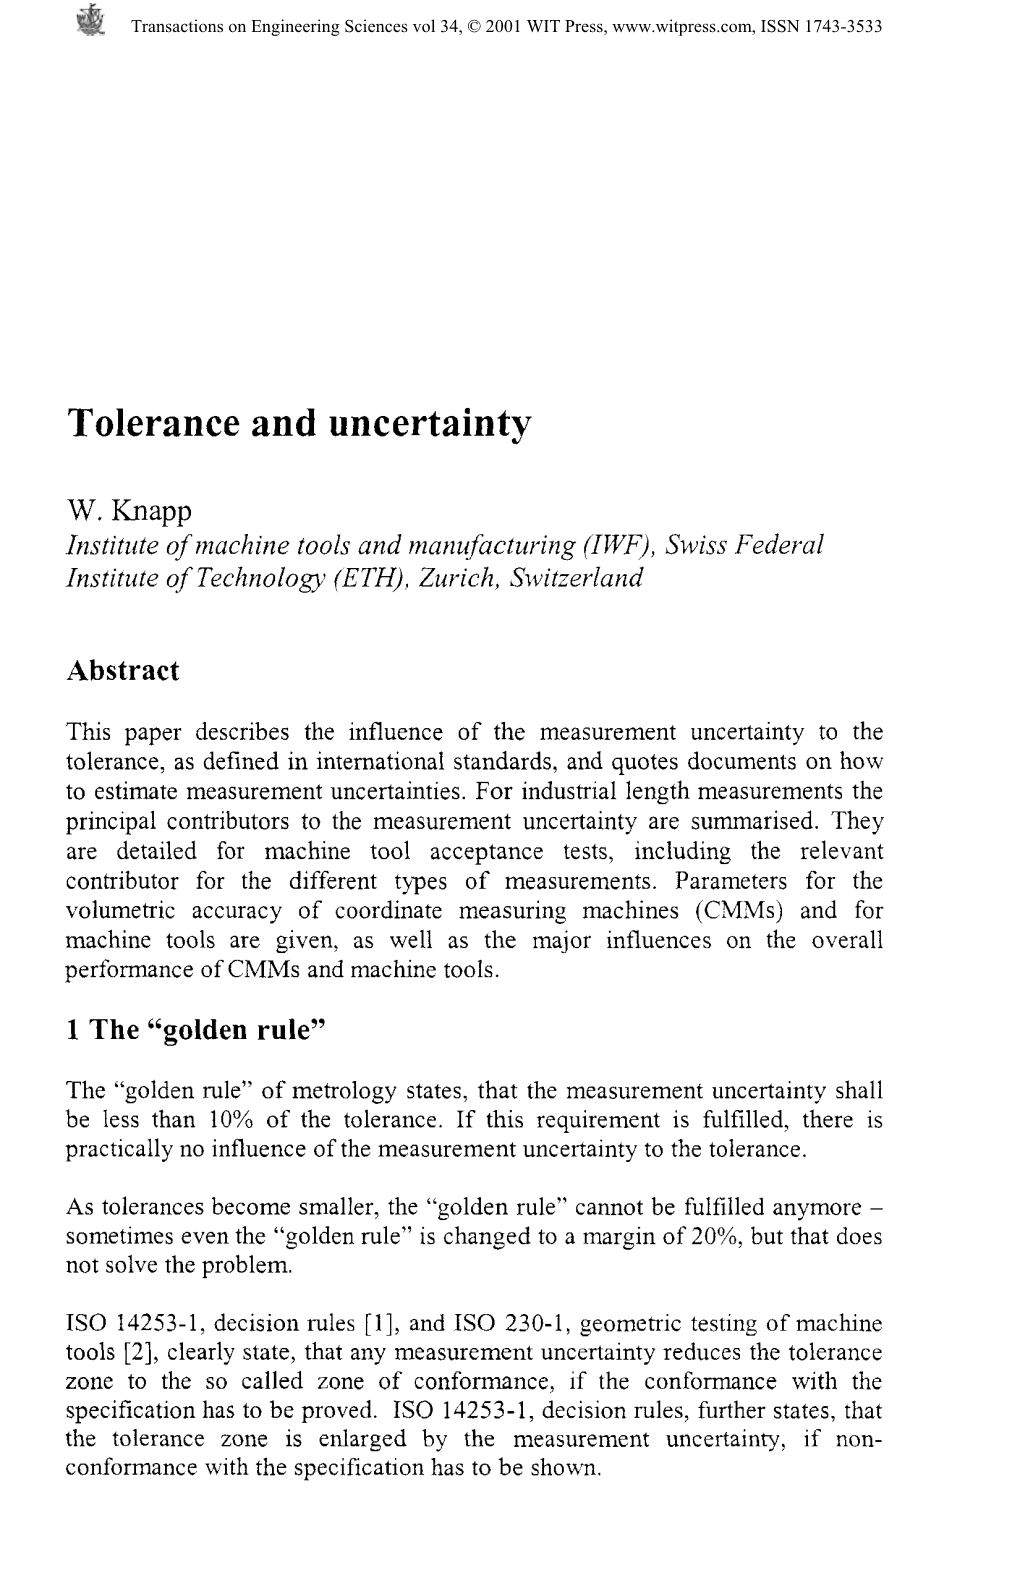 Tolerance and Uncertainty